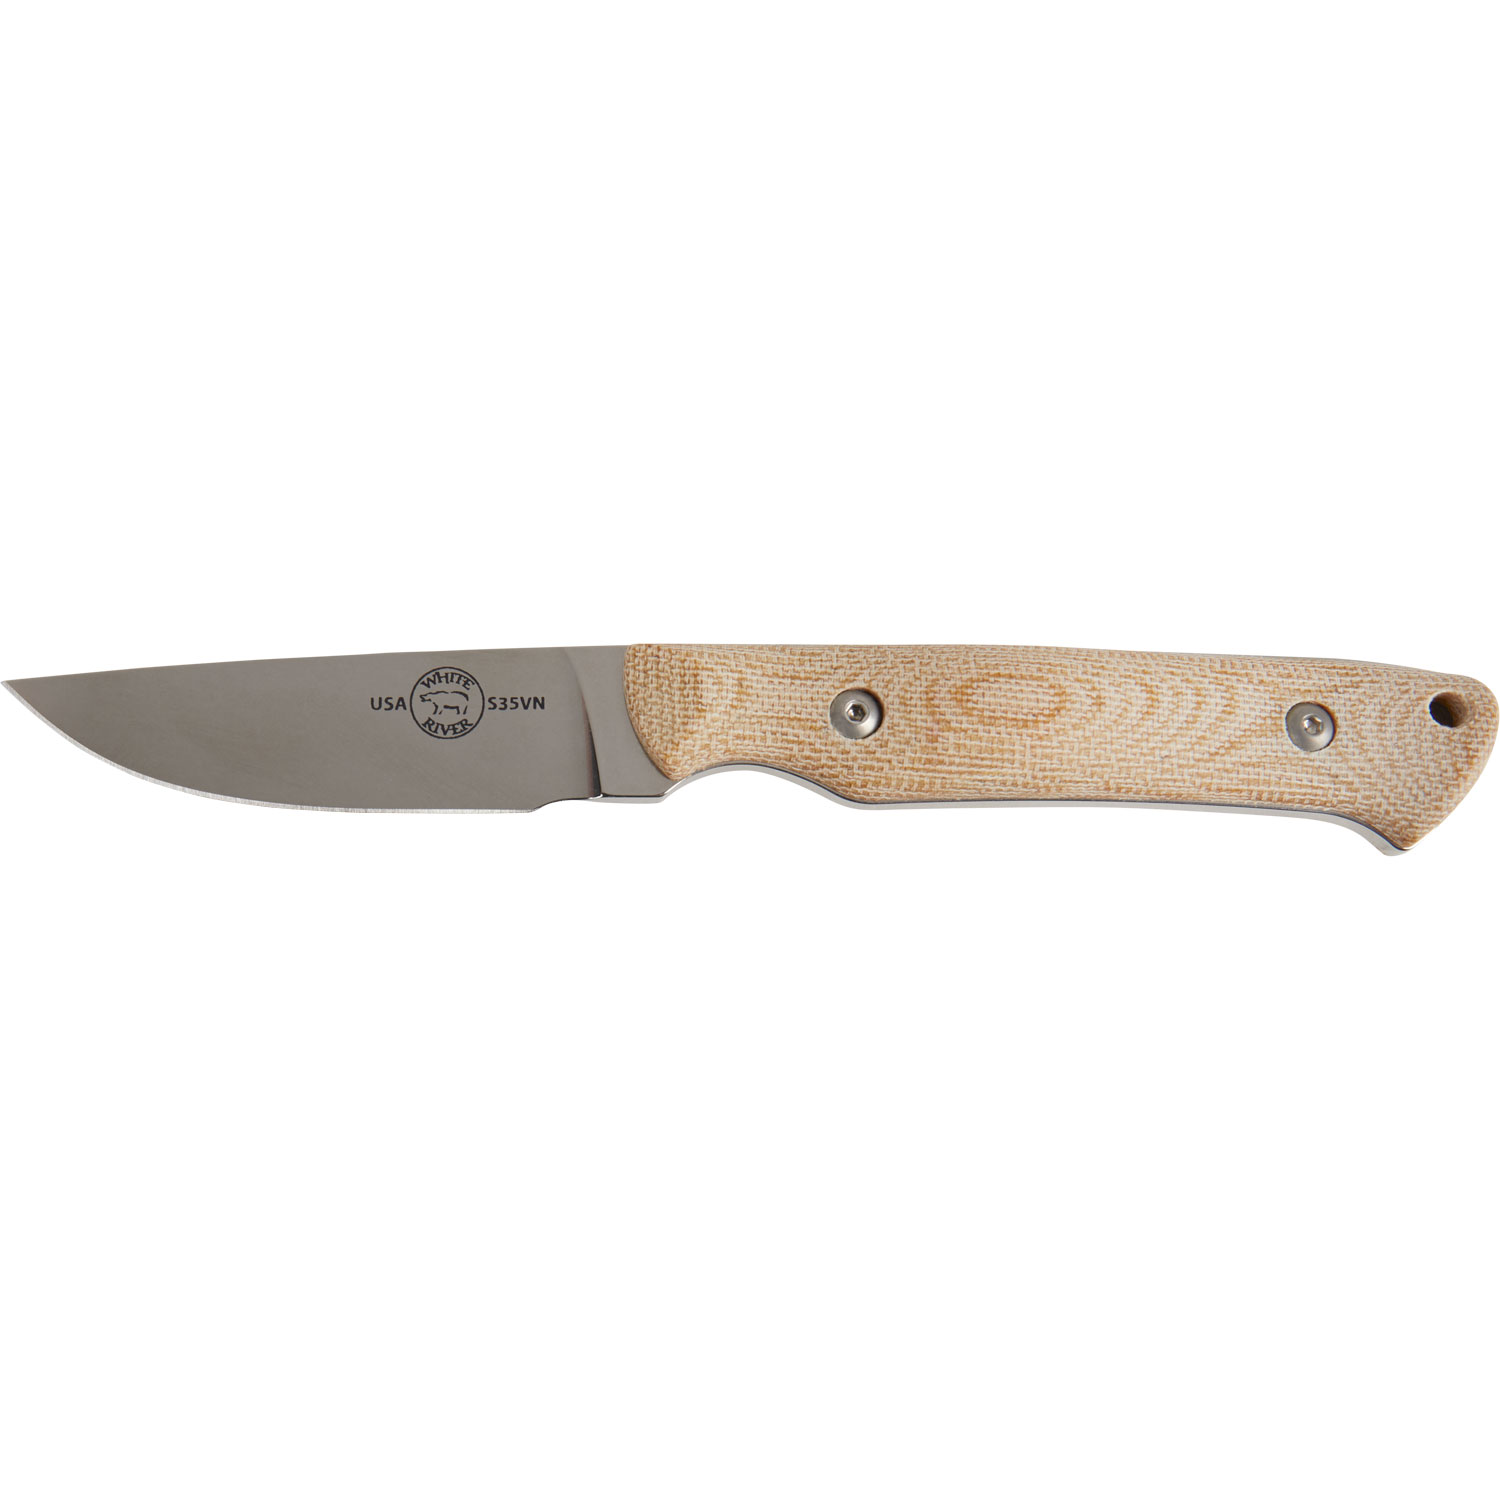 White River Knives Small Game Knife